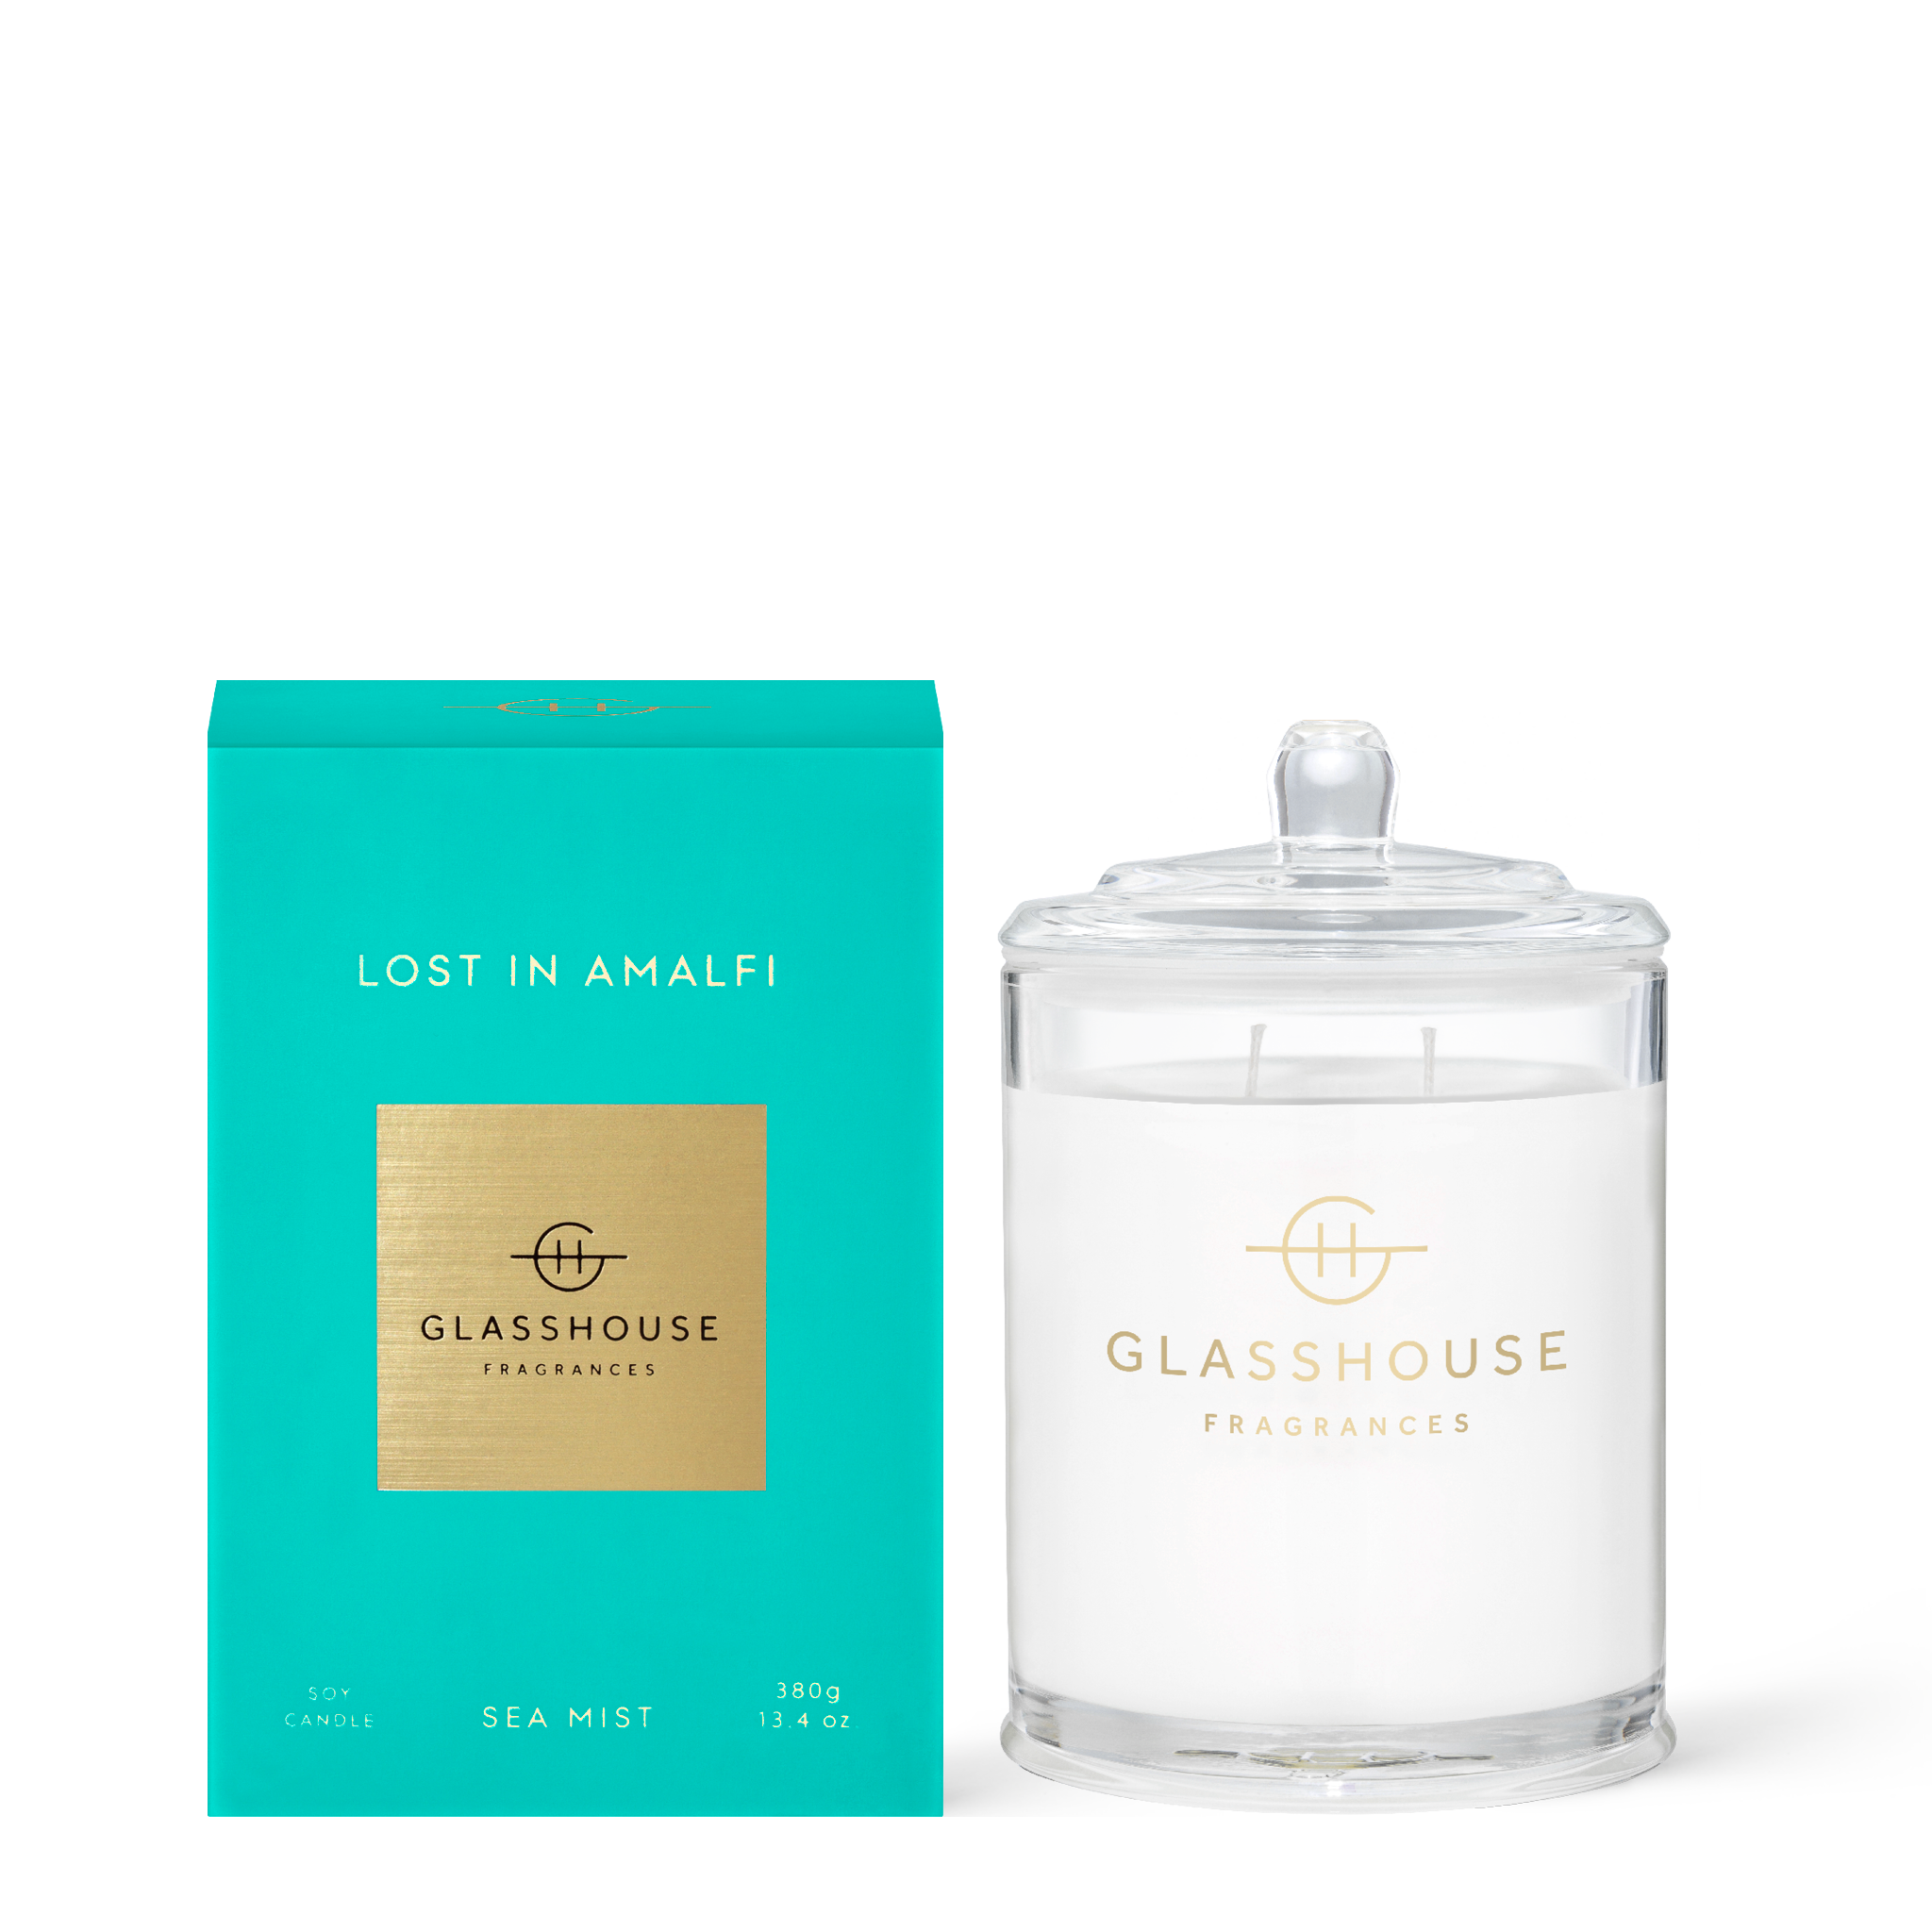 Glasshouse Fragrances Lost in Amalfi Sea Mist 380g Soy Candle with box